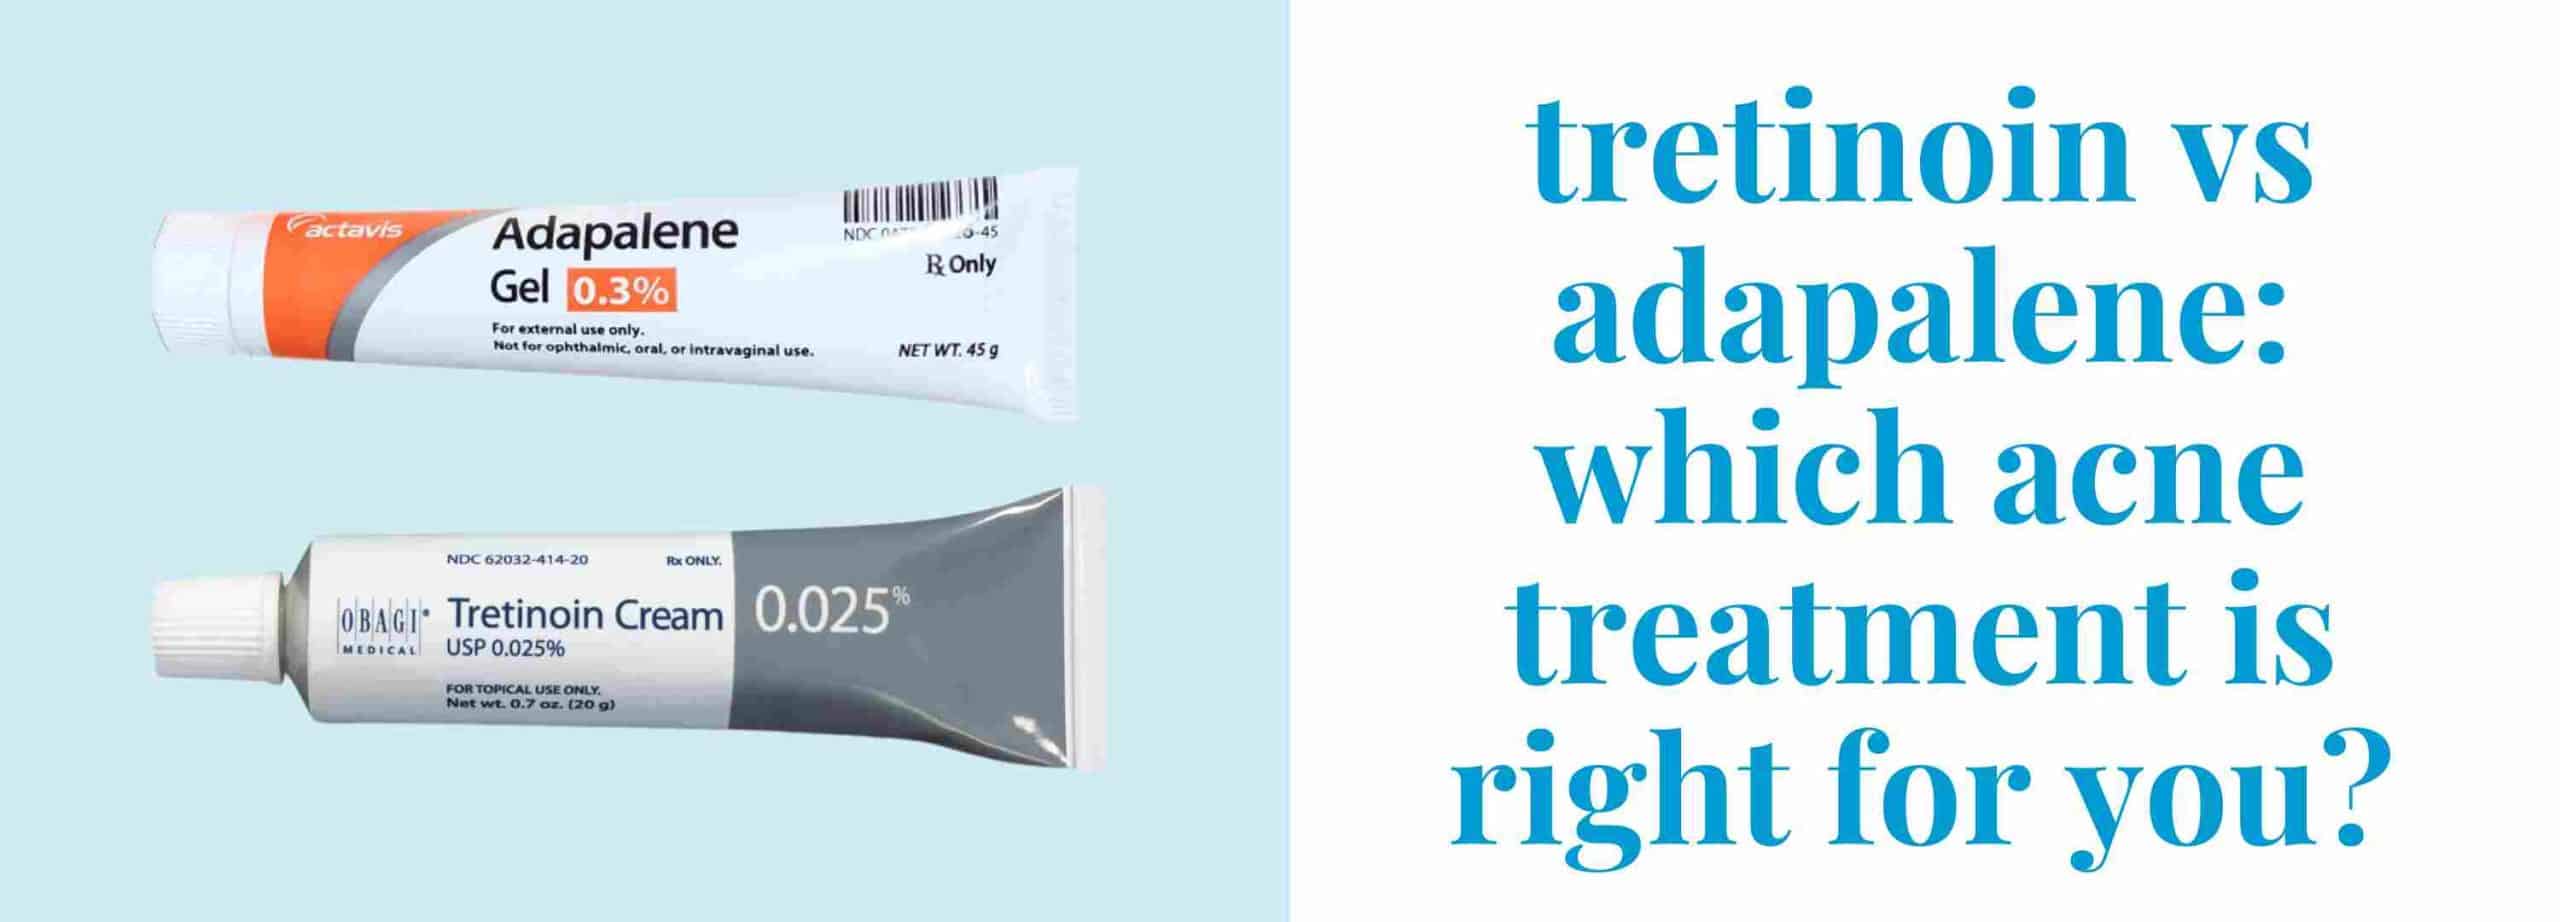 Tretinoin vs Adapalene: Which Acne Treatment is Right for You?